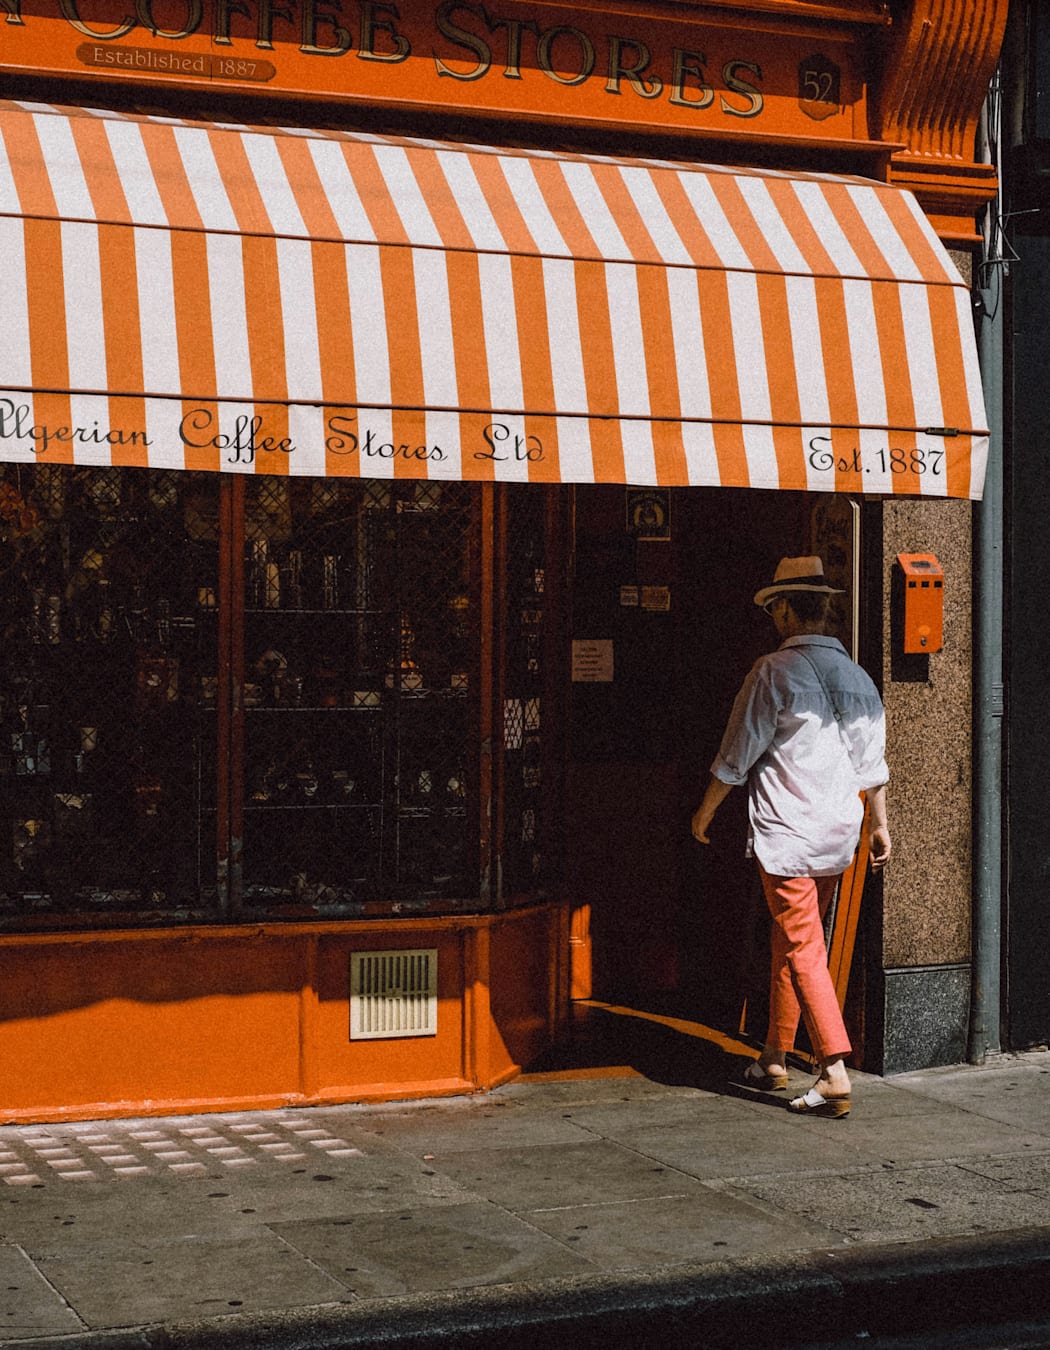 A woman wearing salmon coloured trousers and a white shirt enters into an orange coloured shop. The shop has a striped awning on the outside with the words 